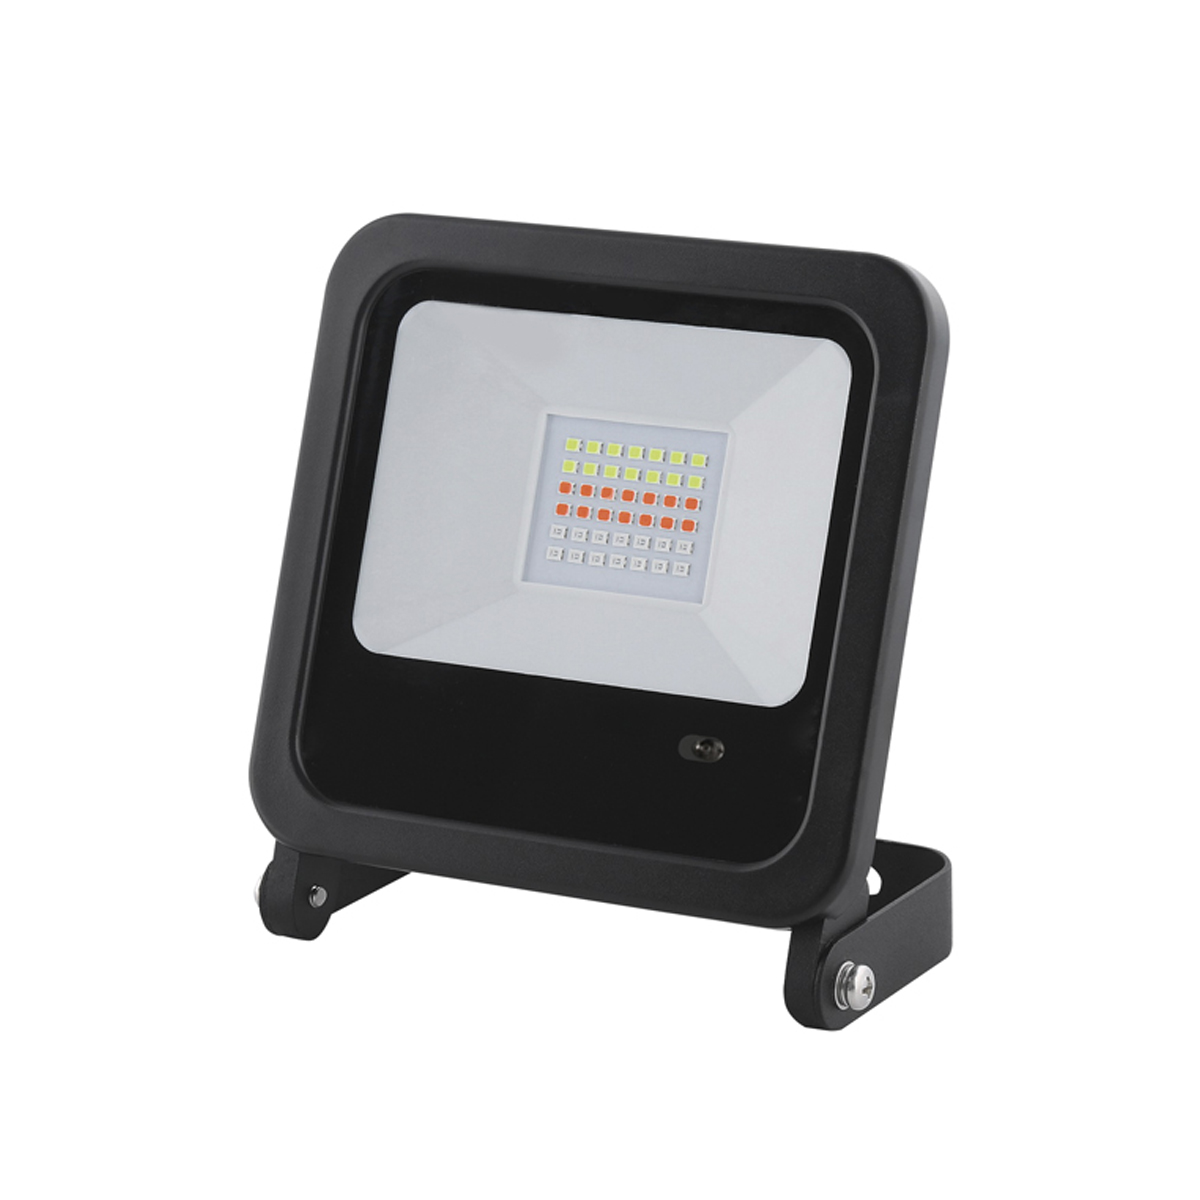 View 30w RGB LED Flood Light Colour Changing With Remote Control information